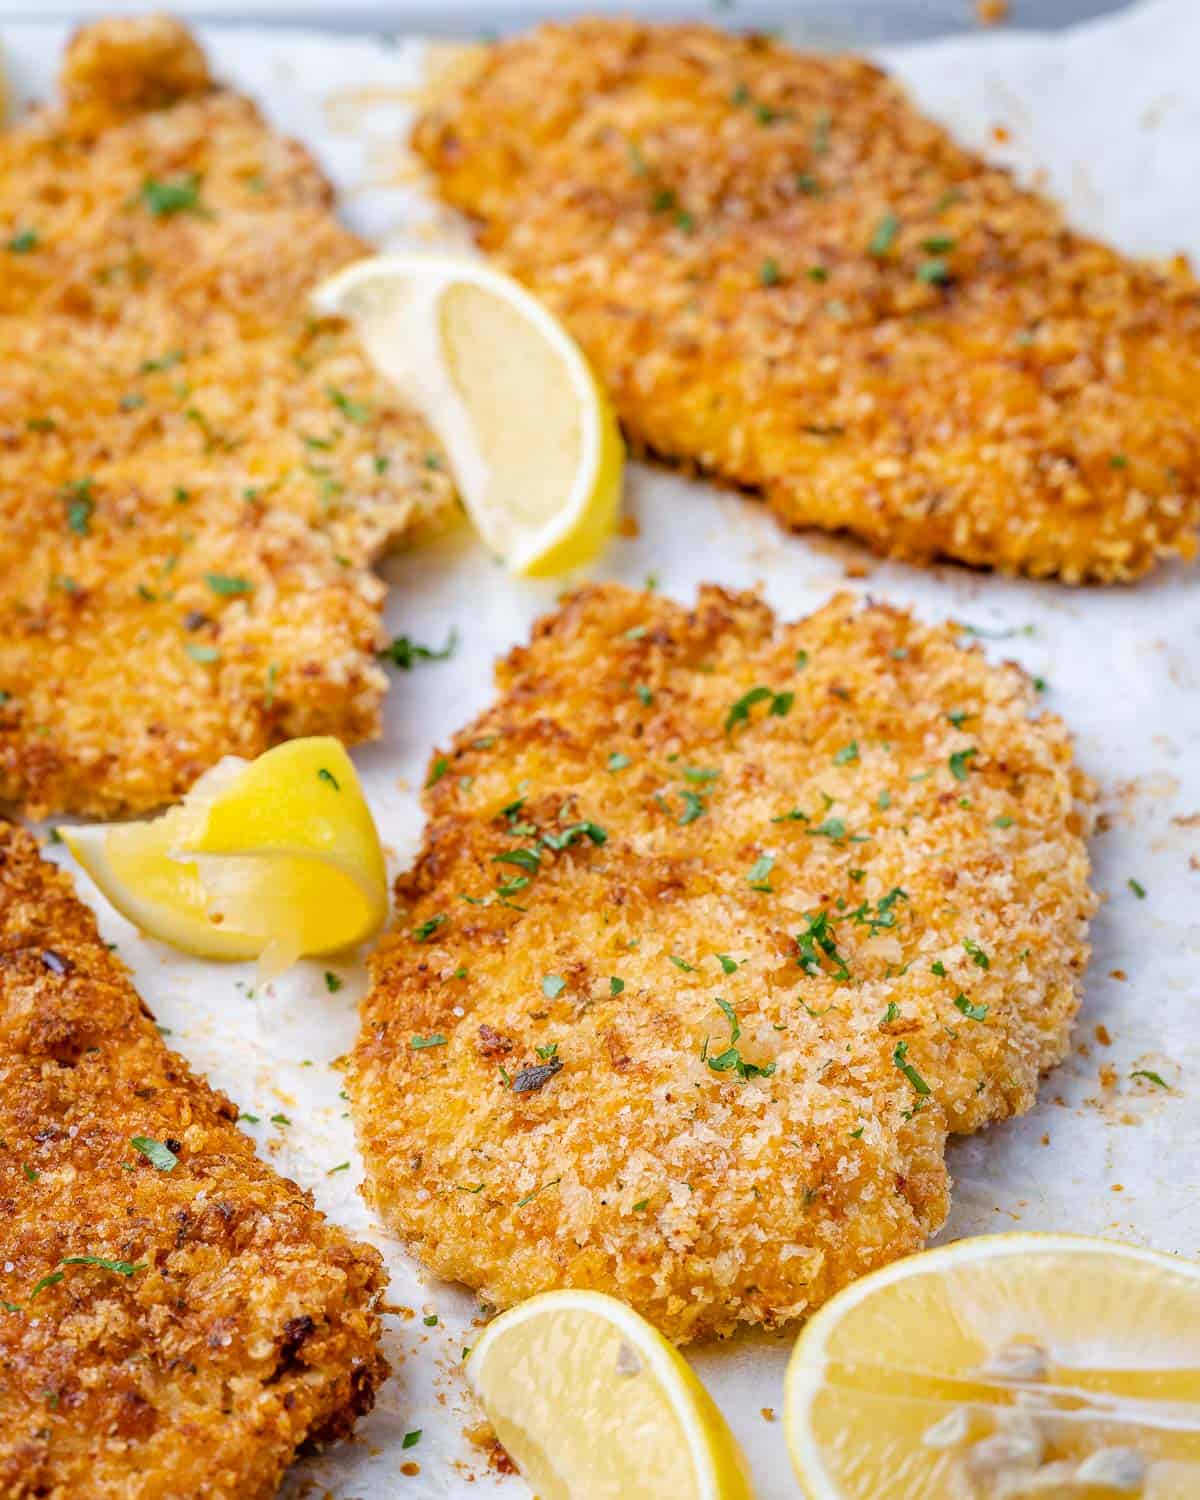 Healthy Parmesan Crusted Chicken - Back To School Dinner Ideas